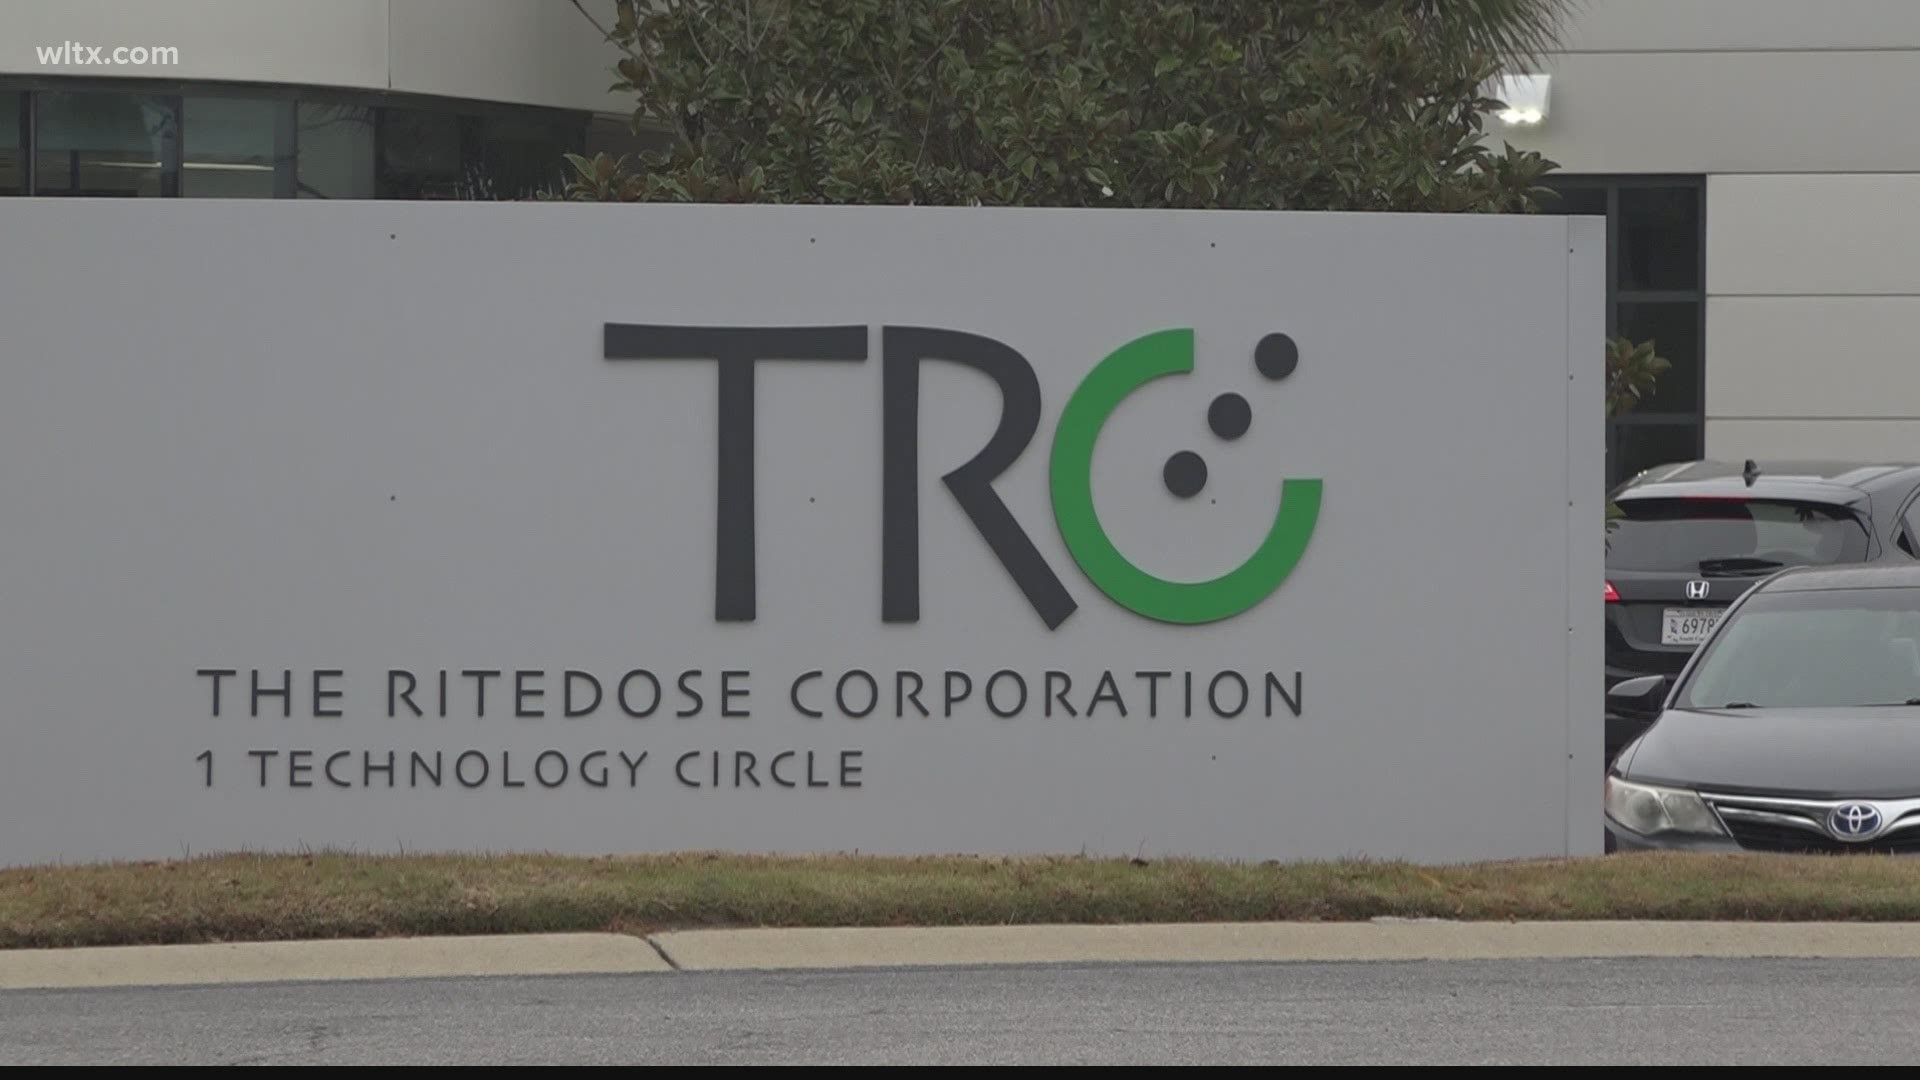 Ritedose will be producing what the vaccine would go in to be administered.